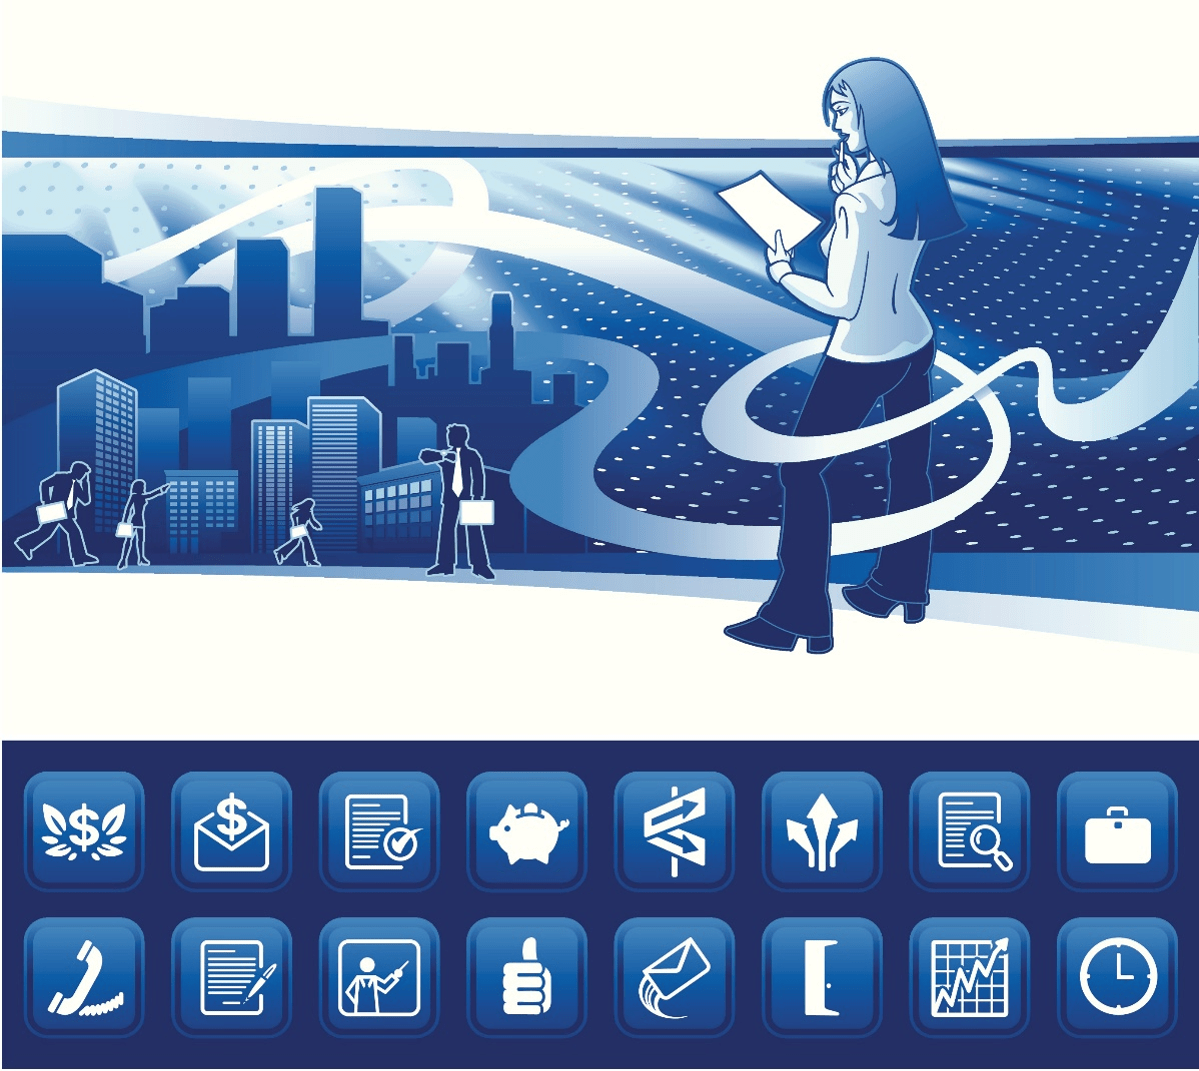 Illustration of business people in a city above various icons.